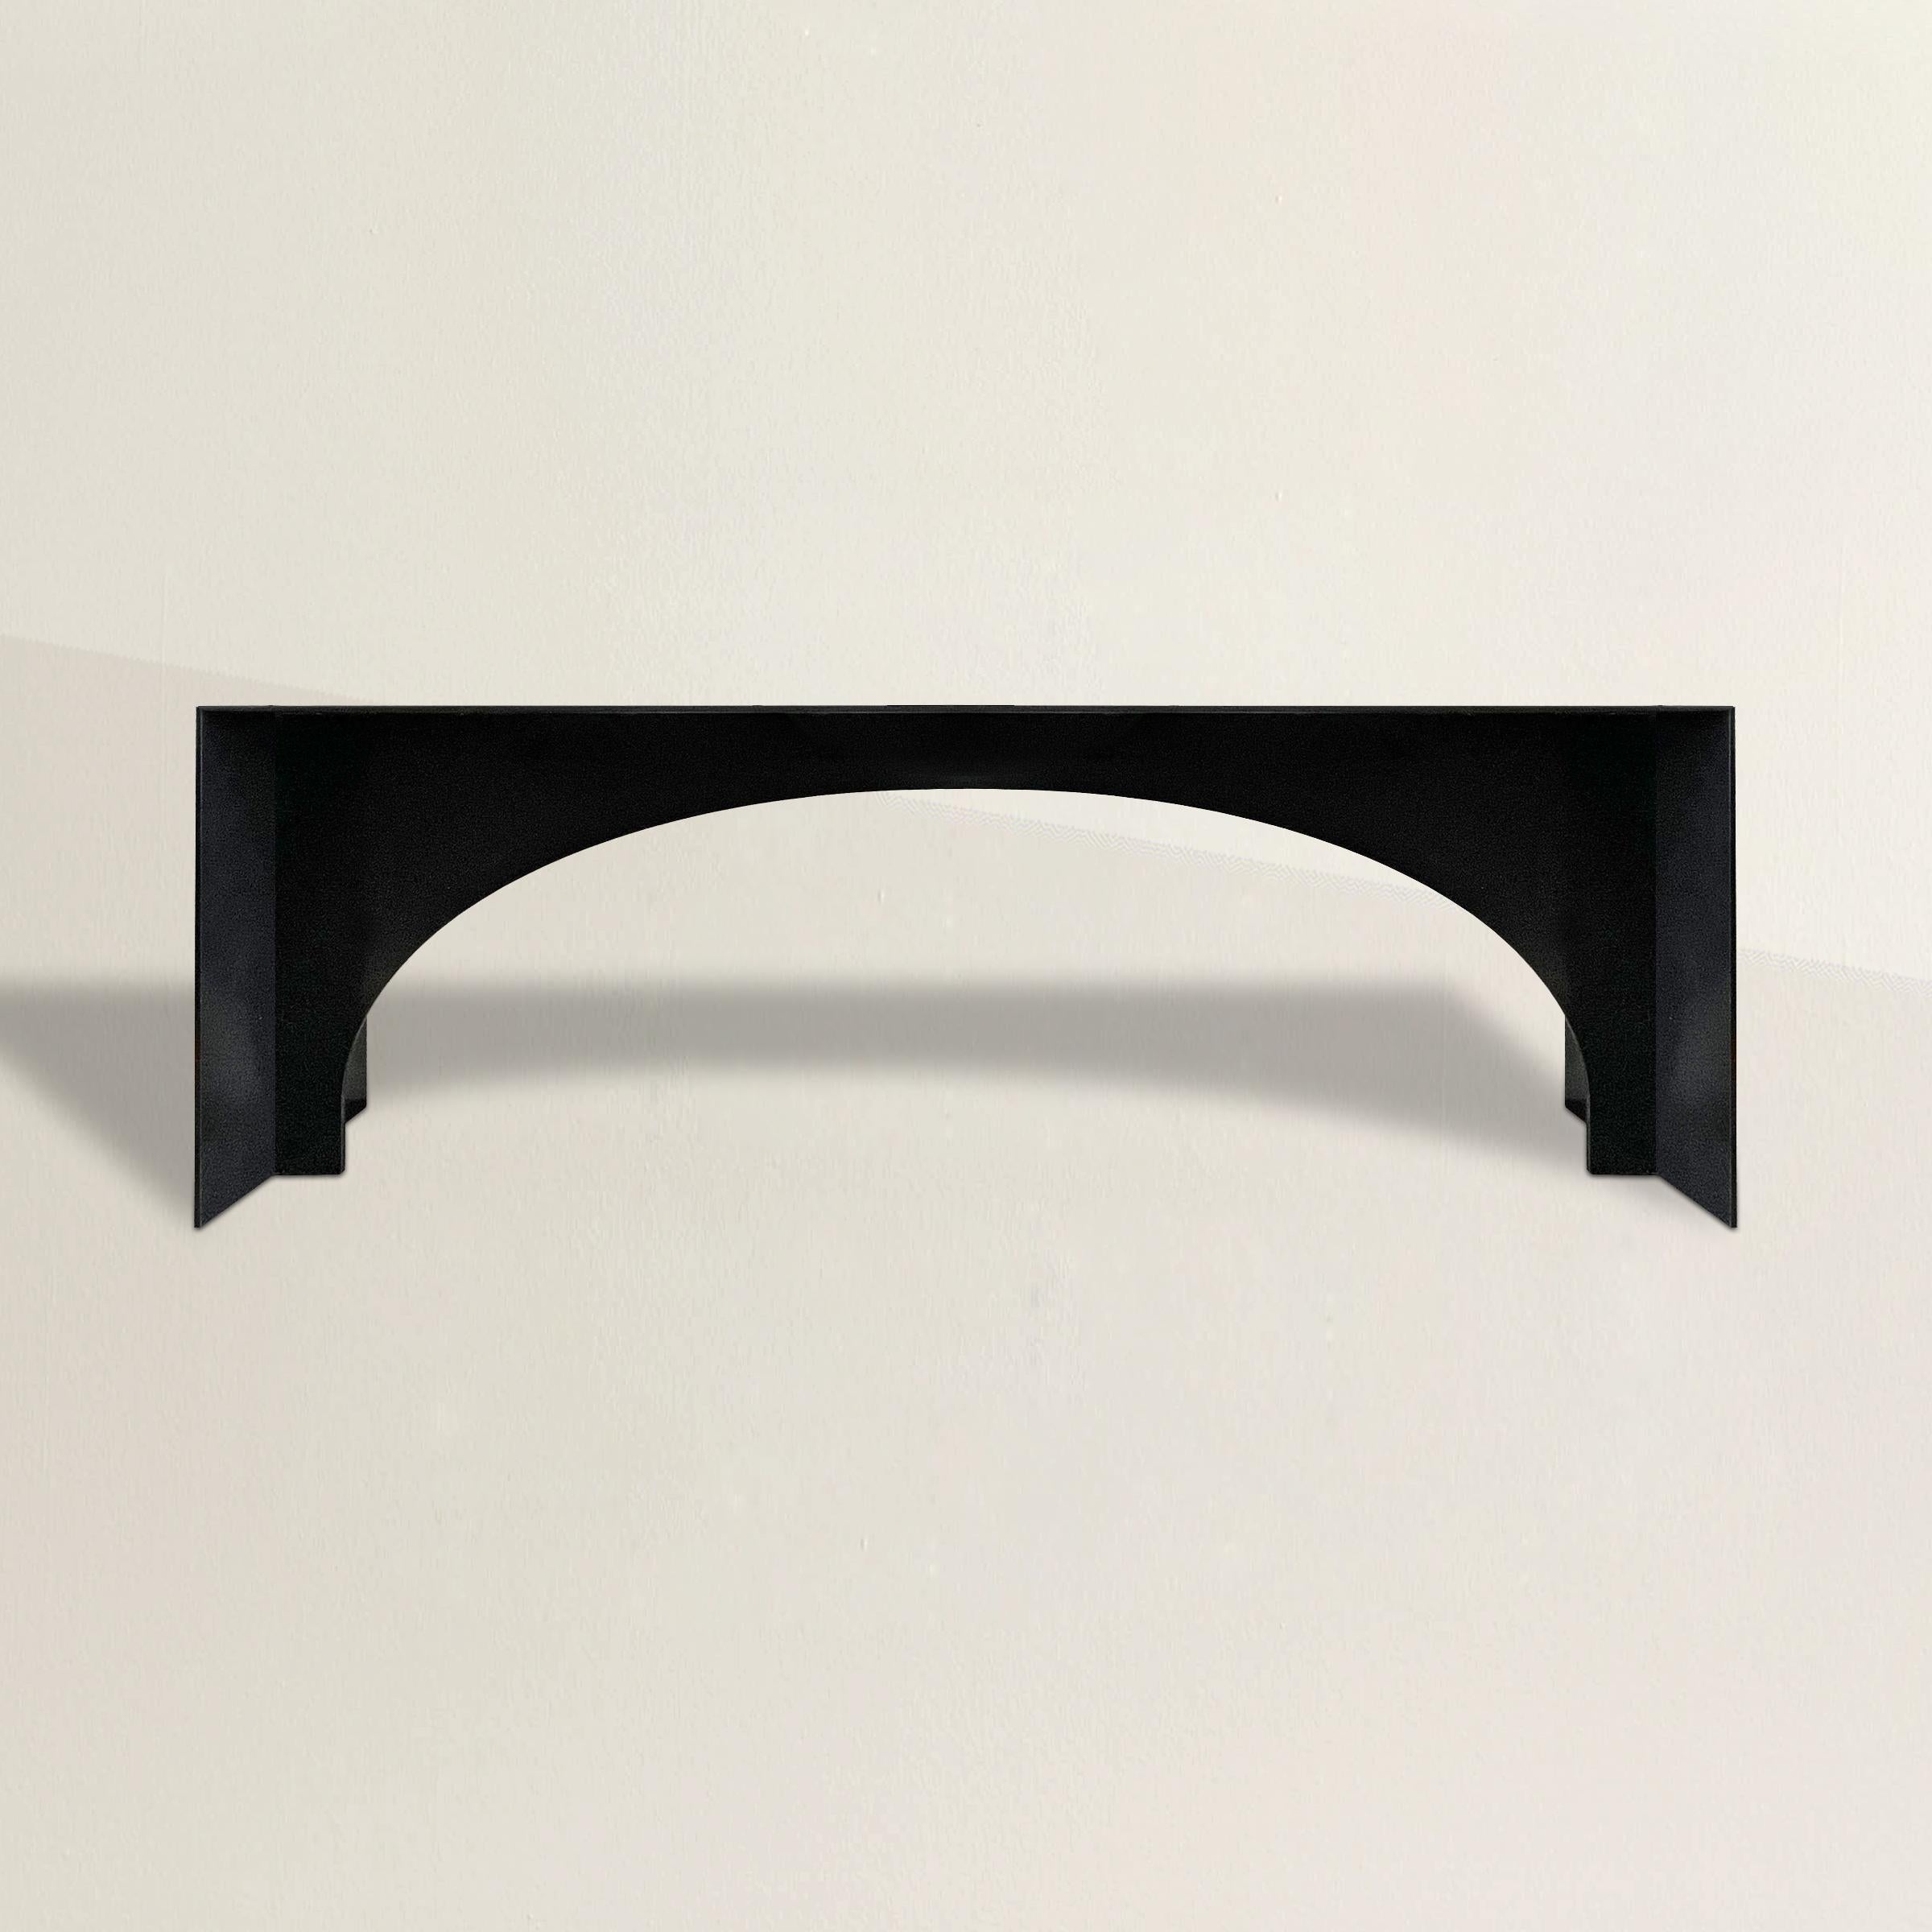 A stunning and memorable contemporary Brutalist-inspired monumental steel console table constructed from 3/8 inch thick steel and with an arched apron between two waterfall legs. The perfect console table in your entry, sideboard in your dining